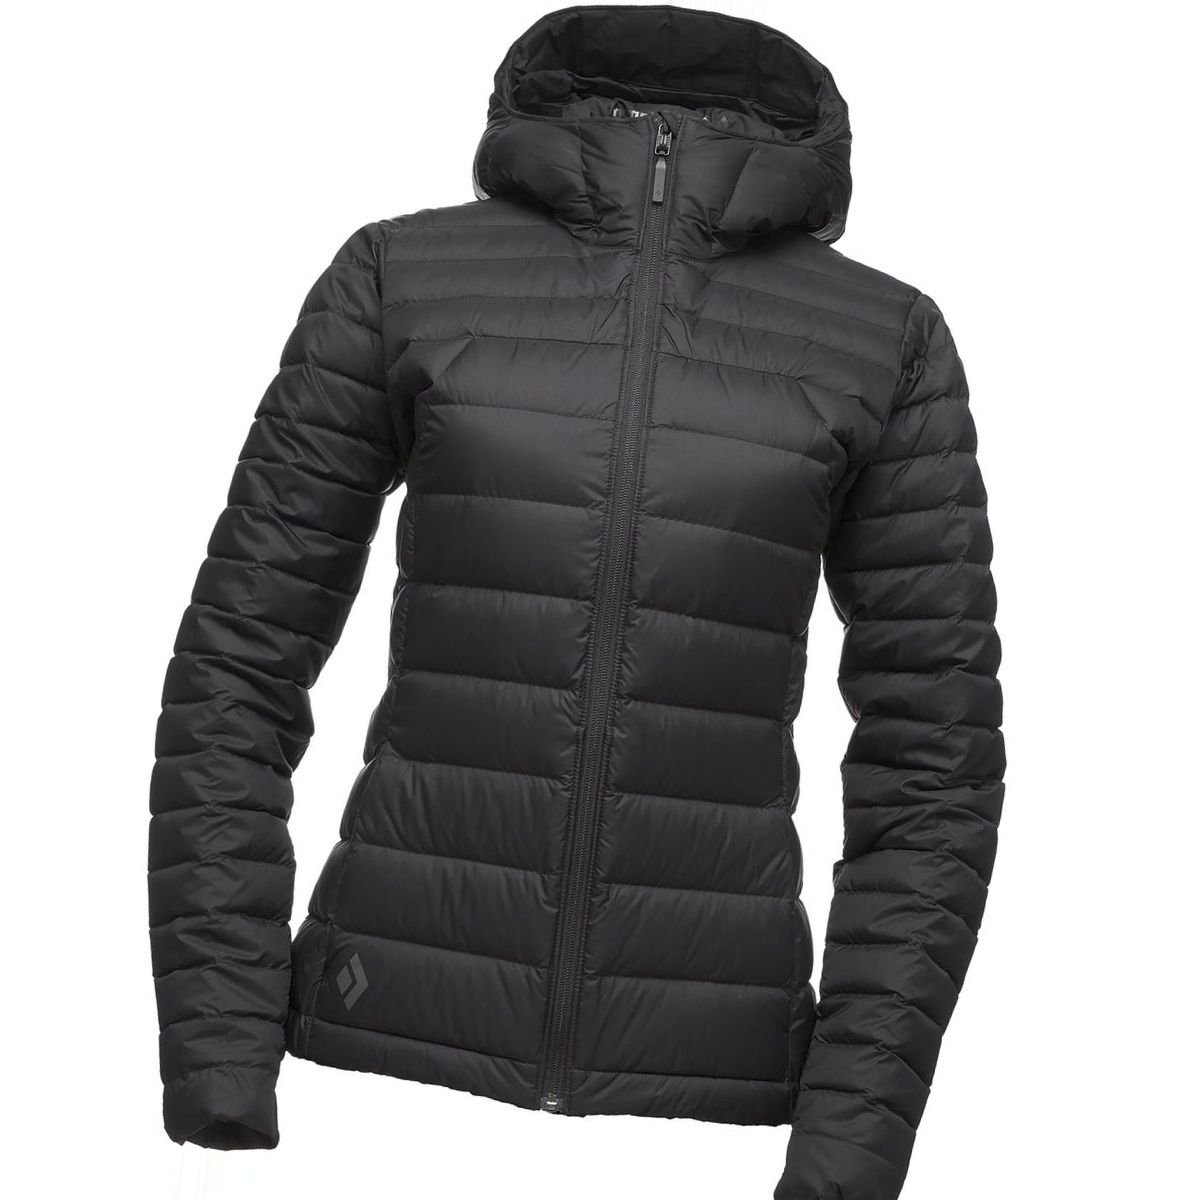 Black Diamond Cold Forge Down Hooded Jacket - Women's